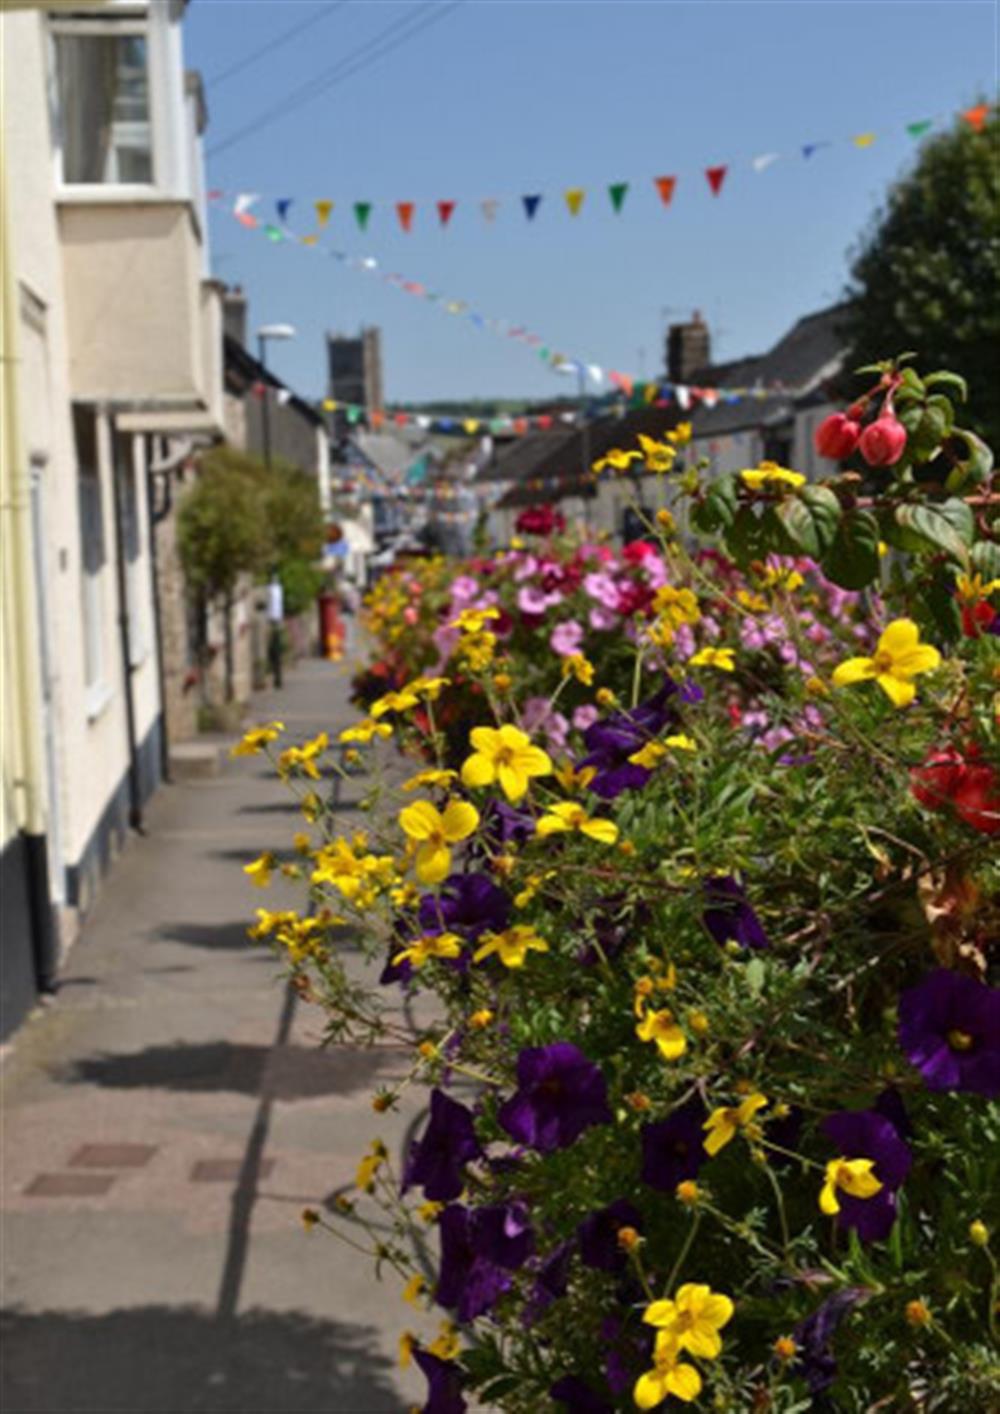 Enjoy a day exploring the antique shops in the Dartmoor town of Moretonhampstead.